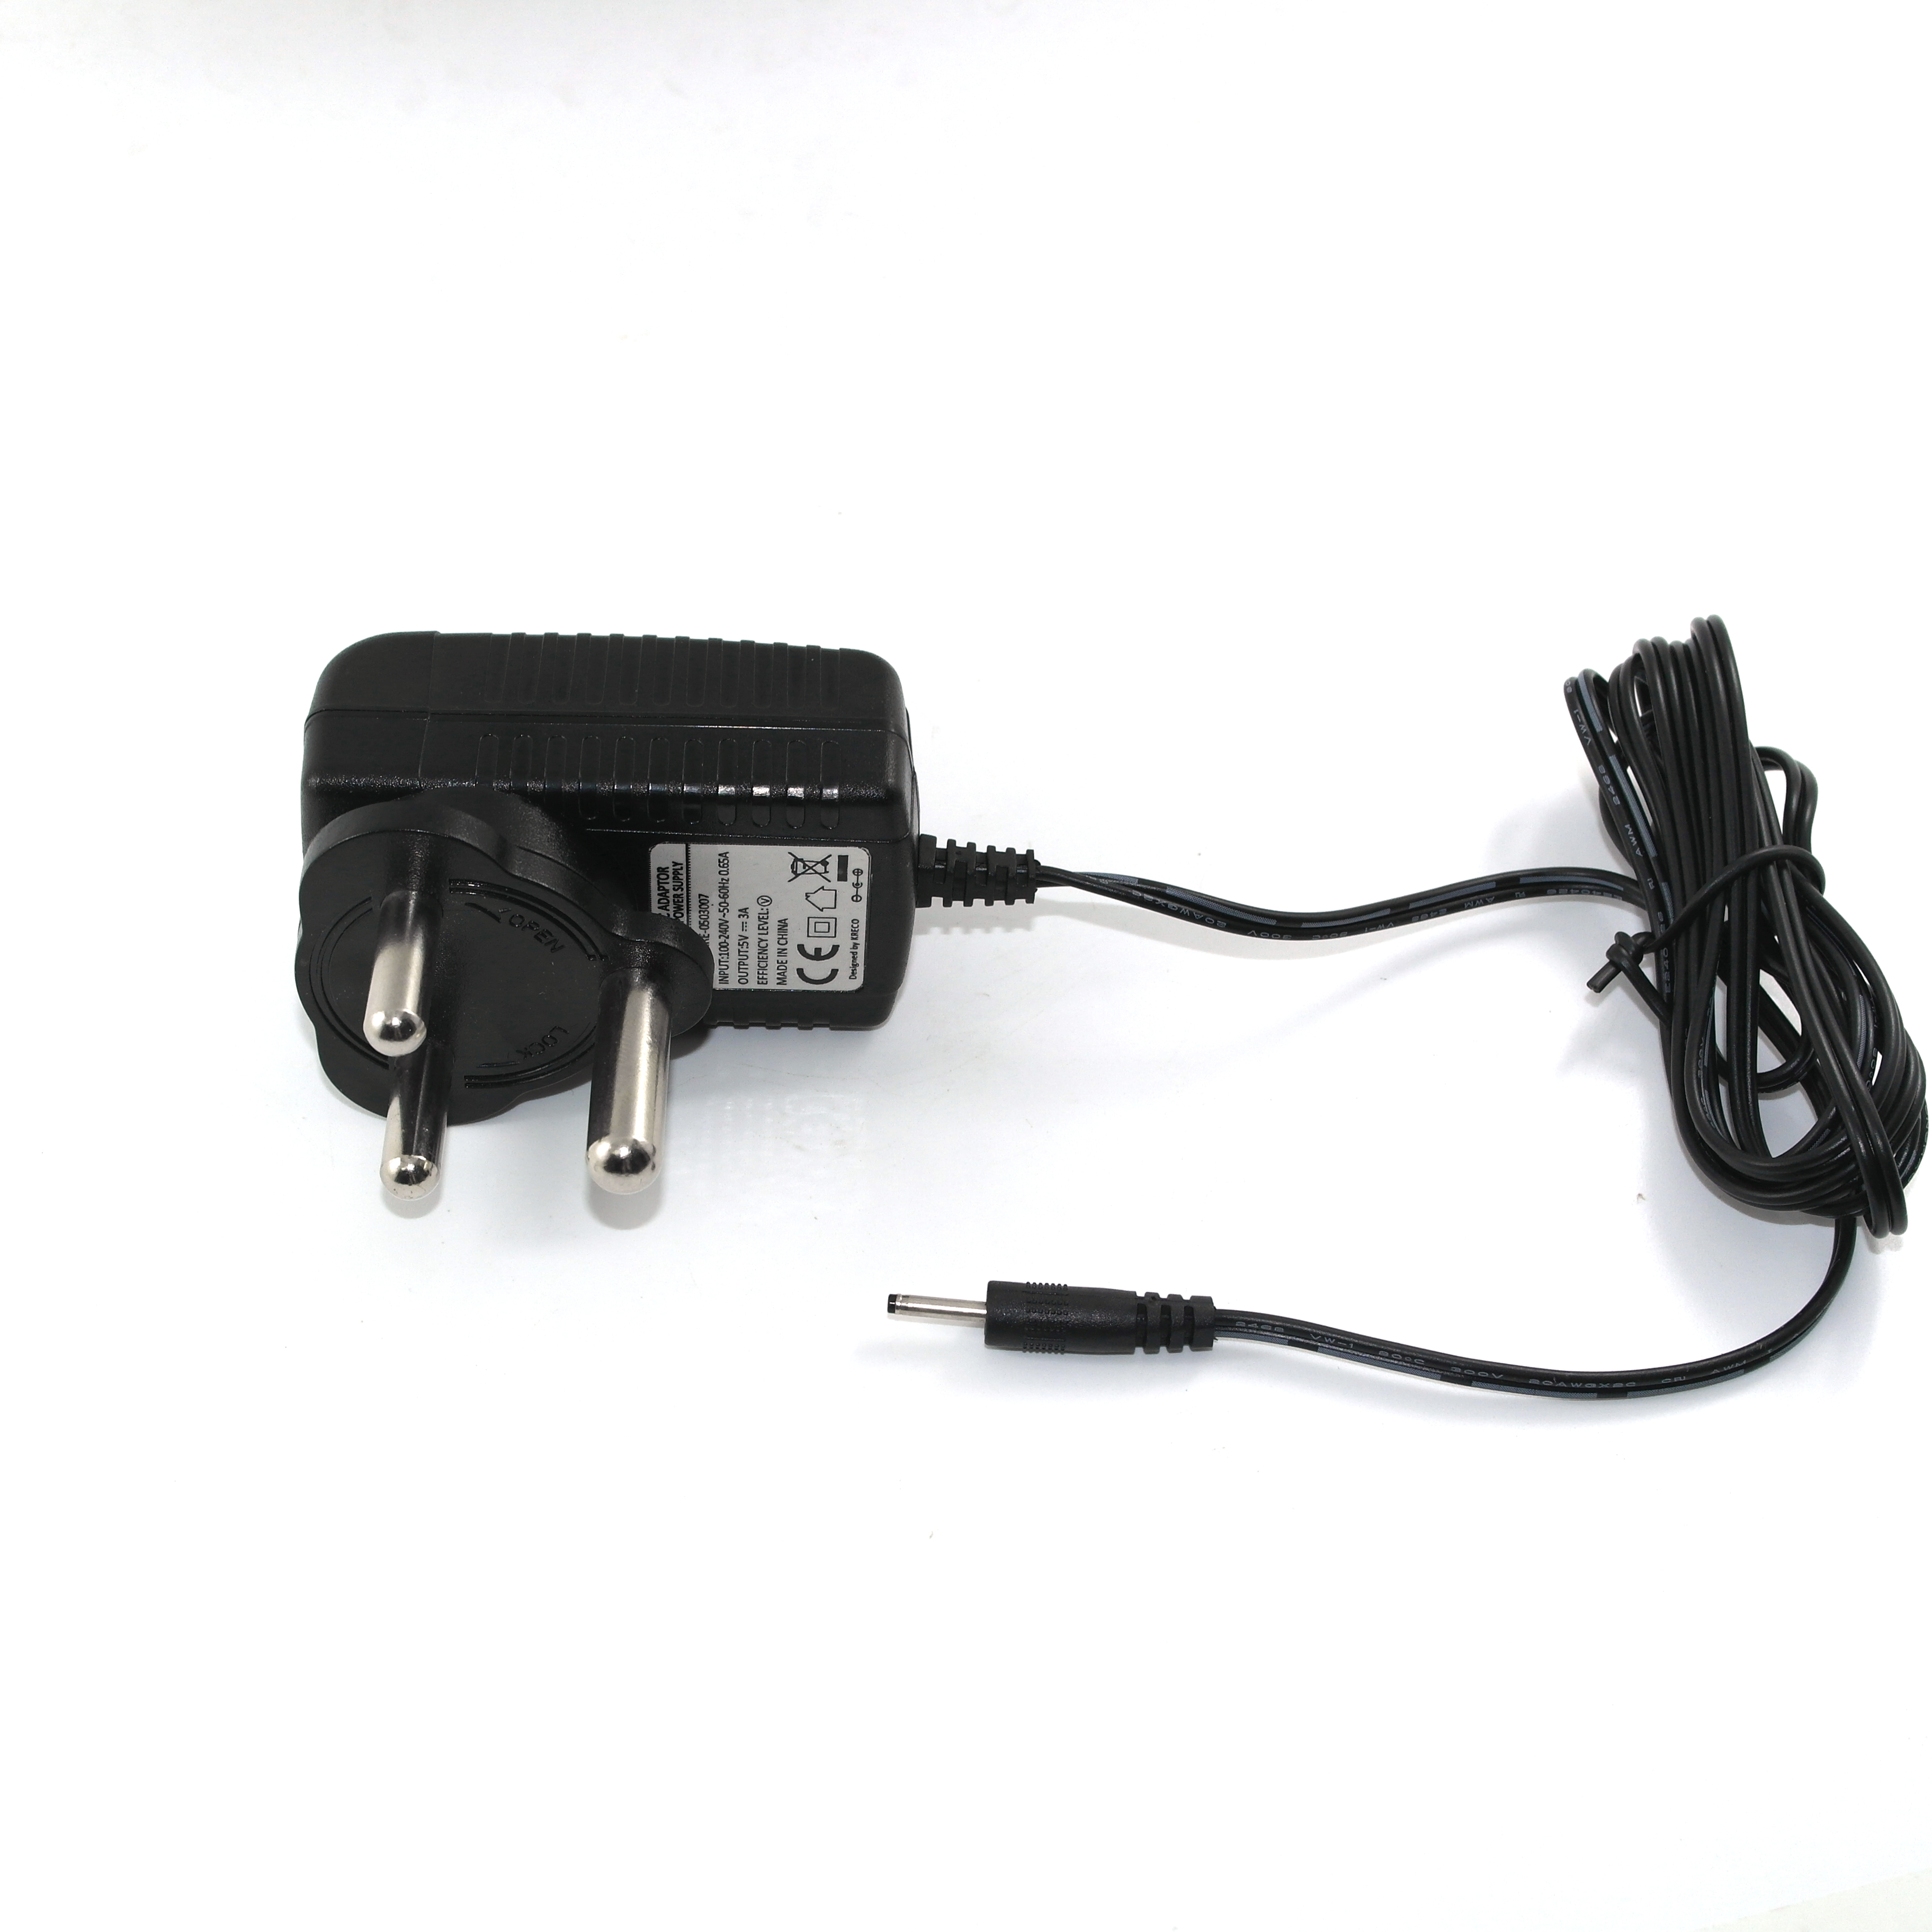 5V 3A 15W AC/DC adapter, switching power supply,Ca